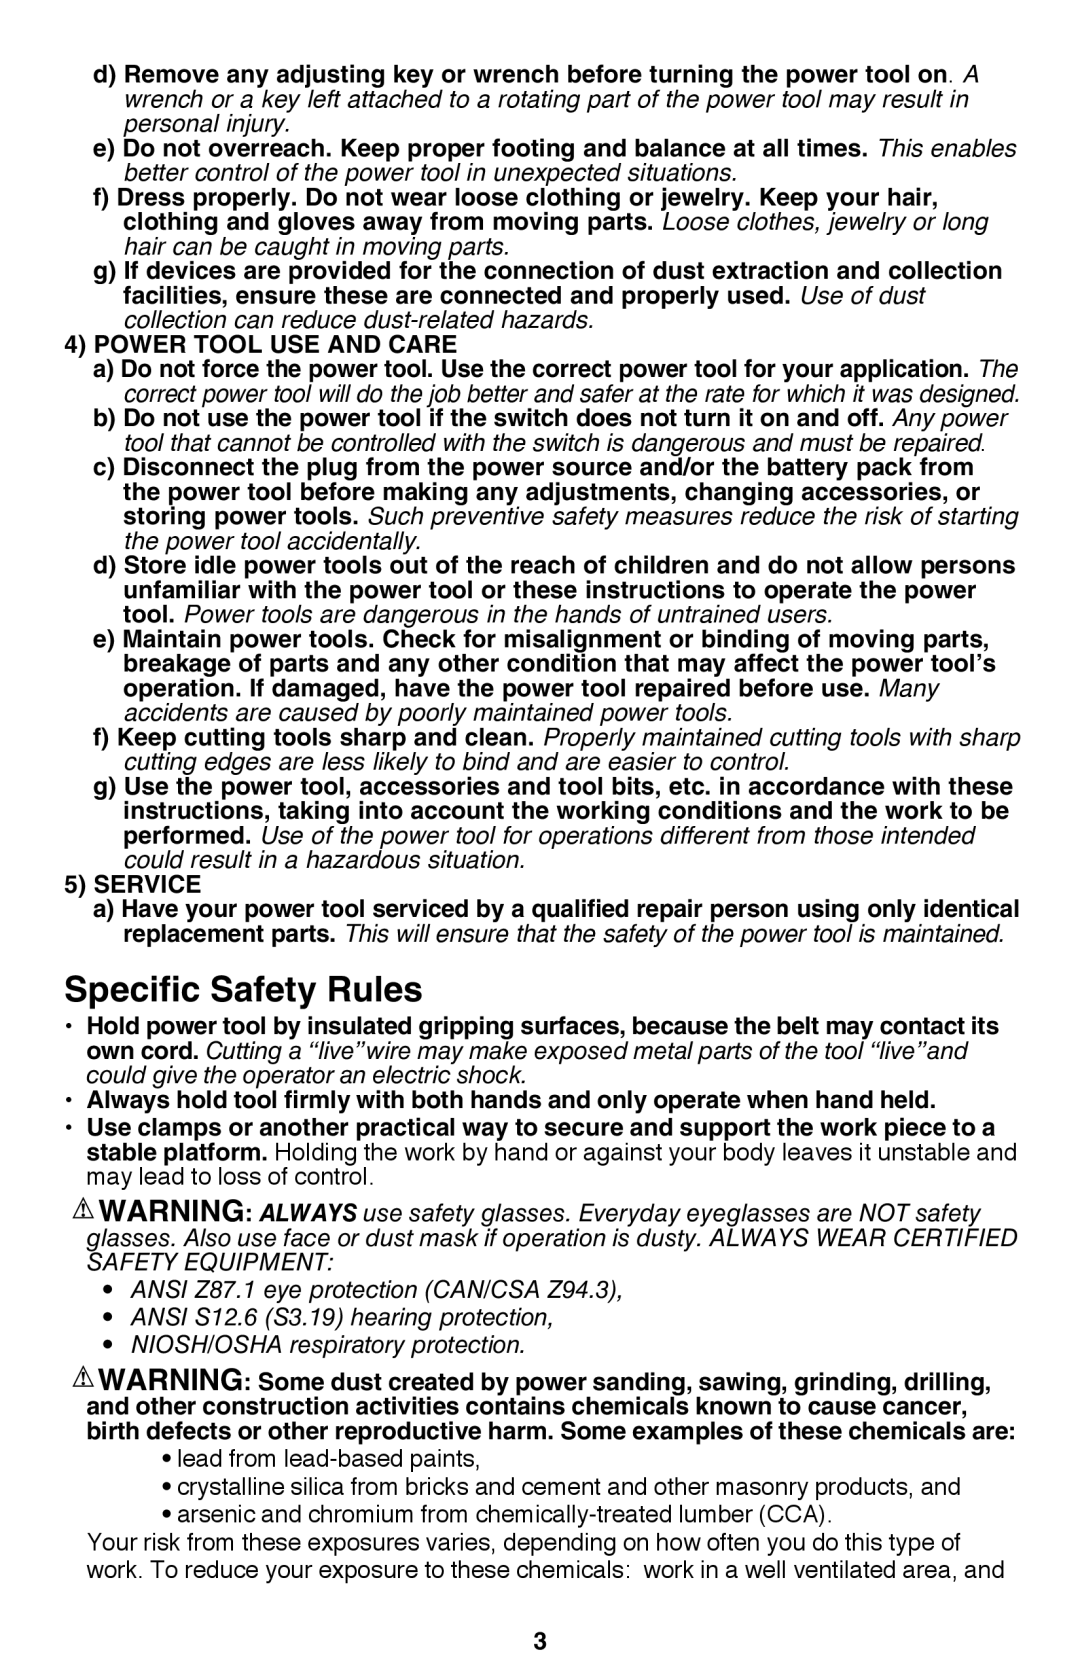 Black & Decker PF260 instruction manual Specific Safety Rules, ANSI Z87.1 eye protection CAN/CSA Z94.3 